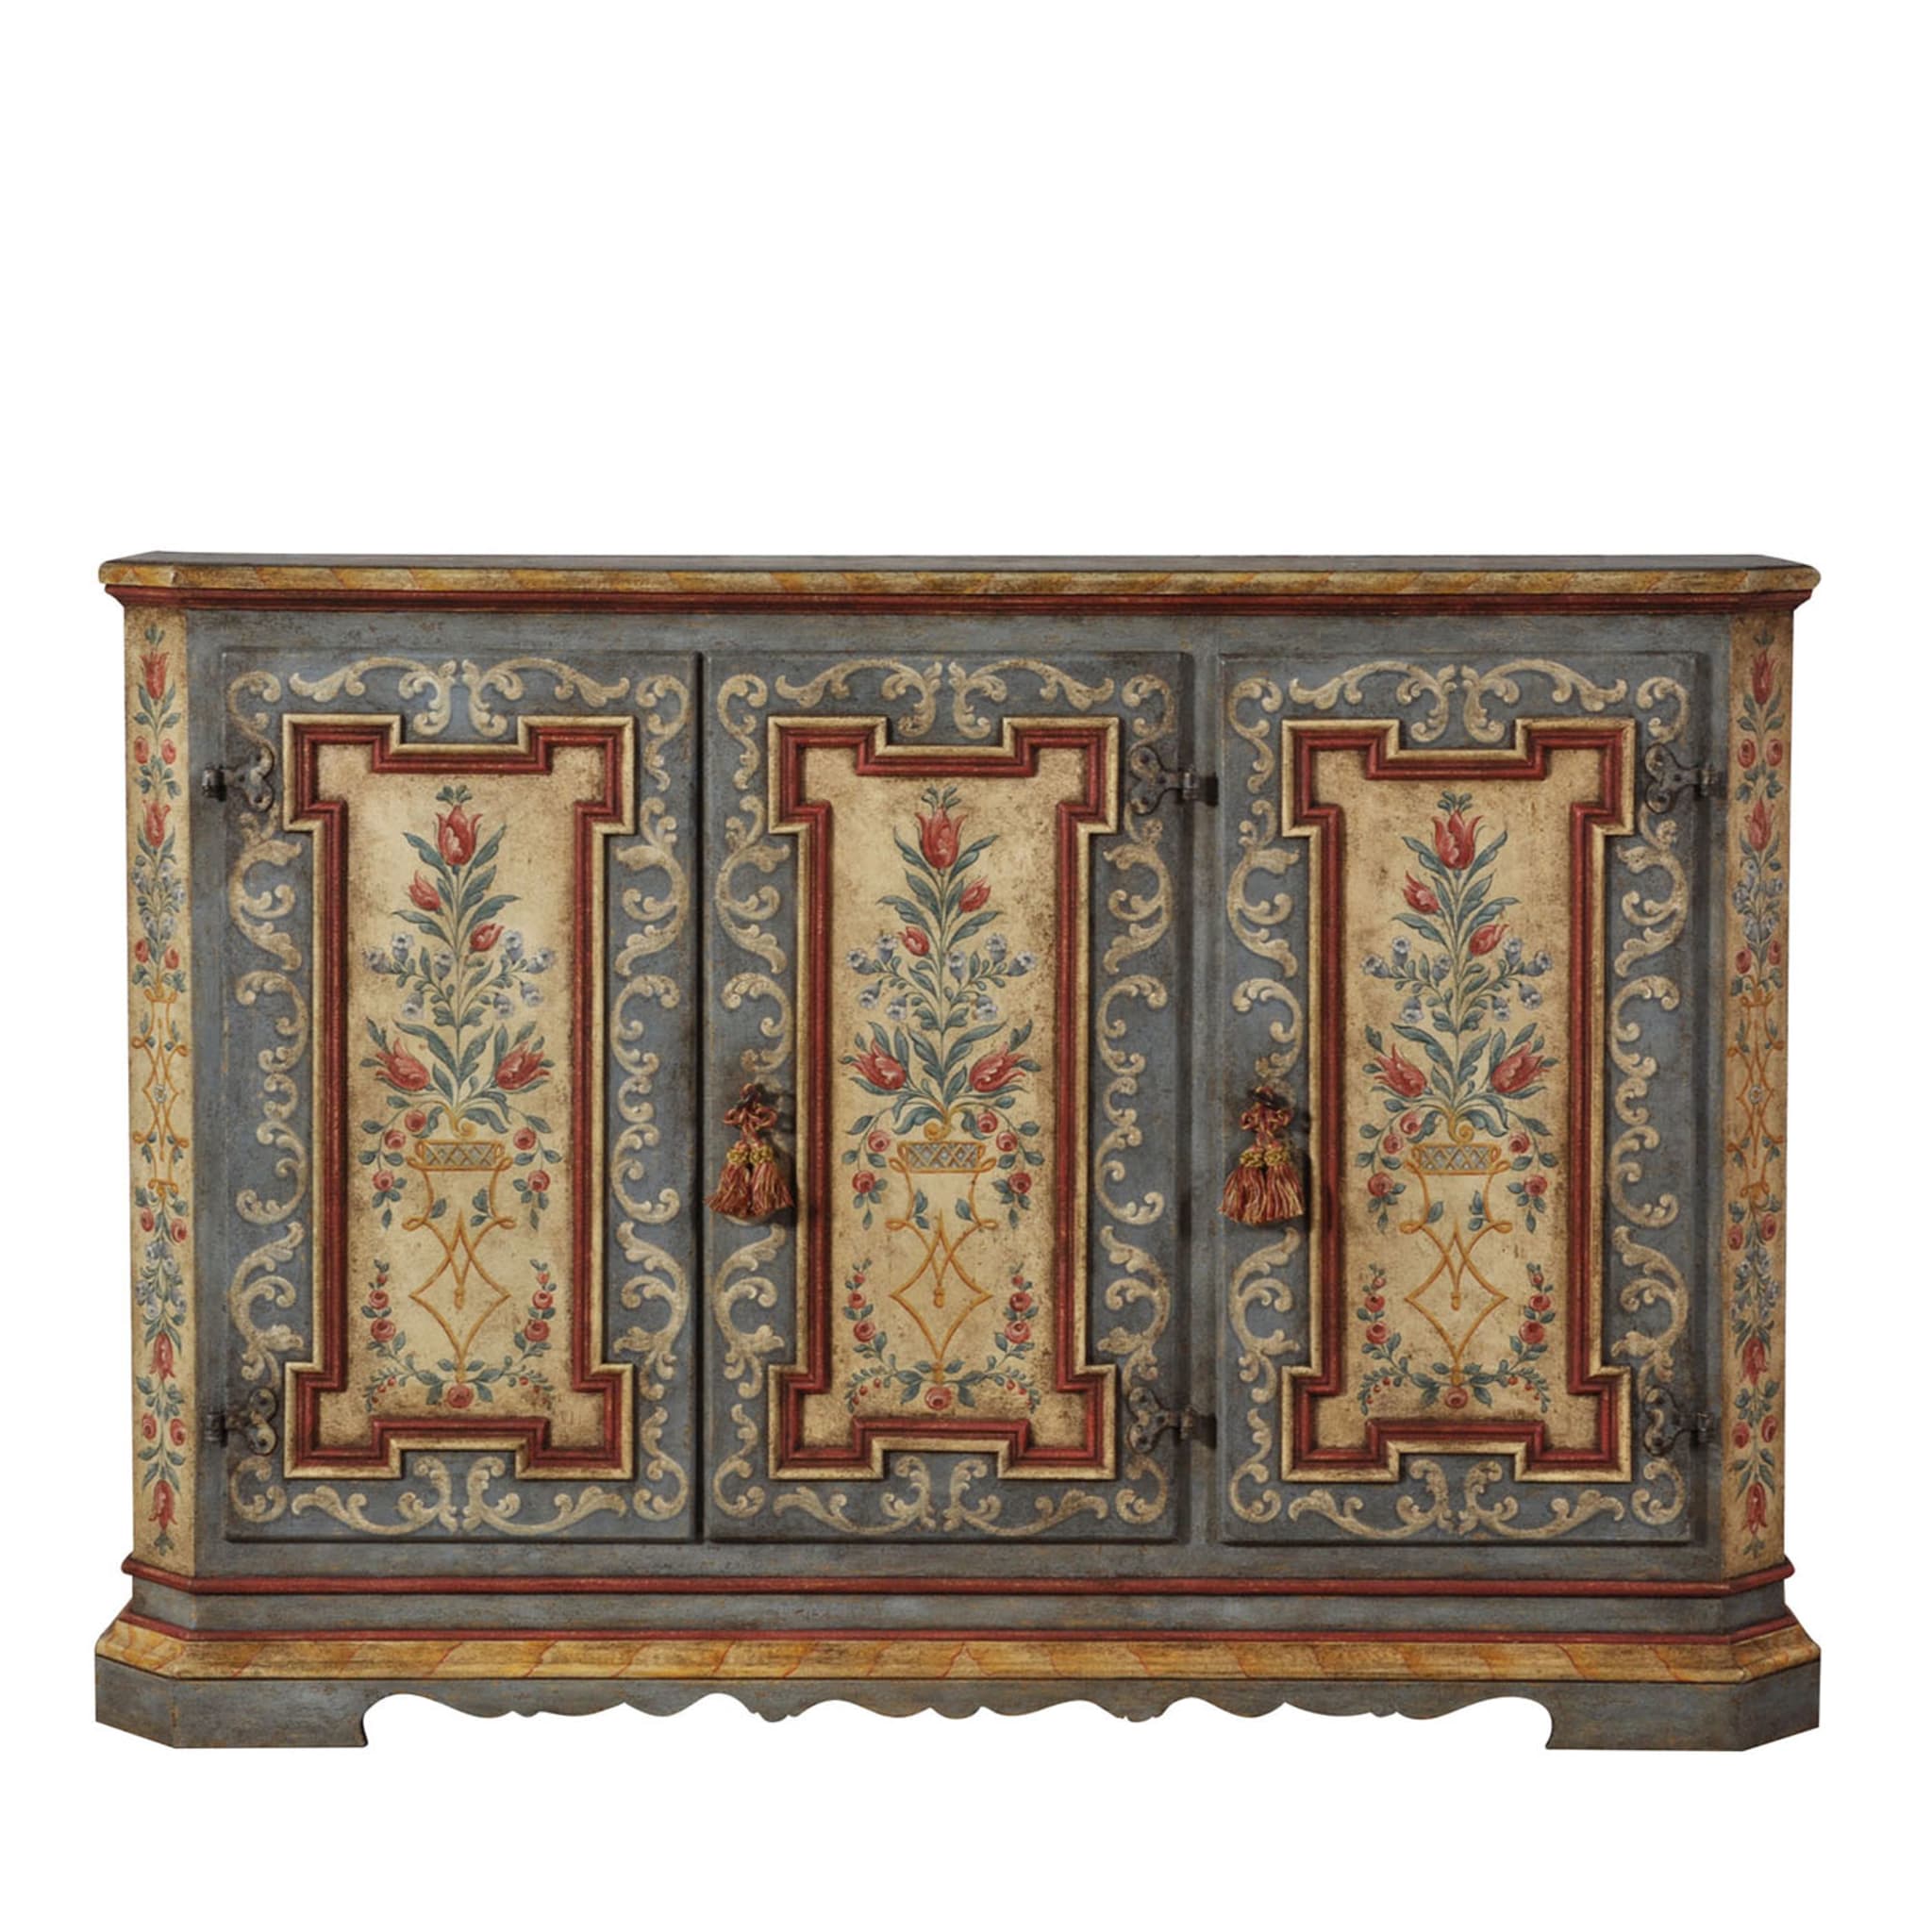 18th-Century Baroque Tyrolean-Style Floral Sideboard - Main view